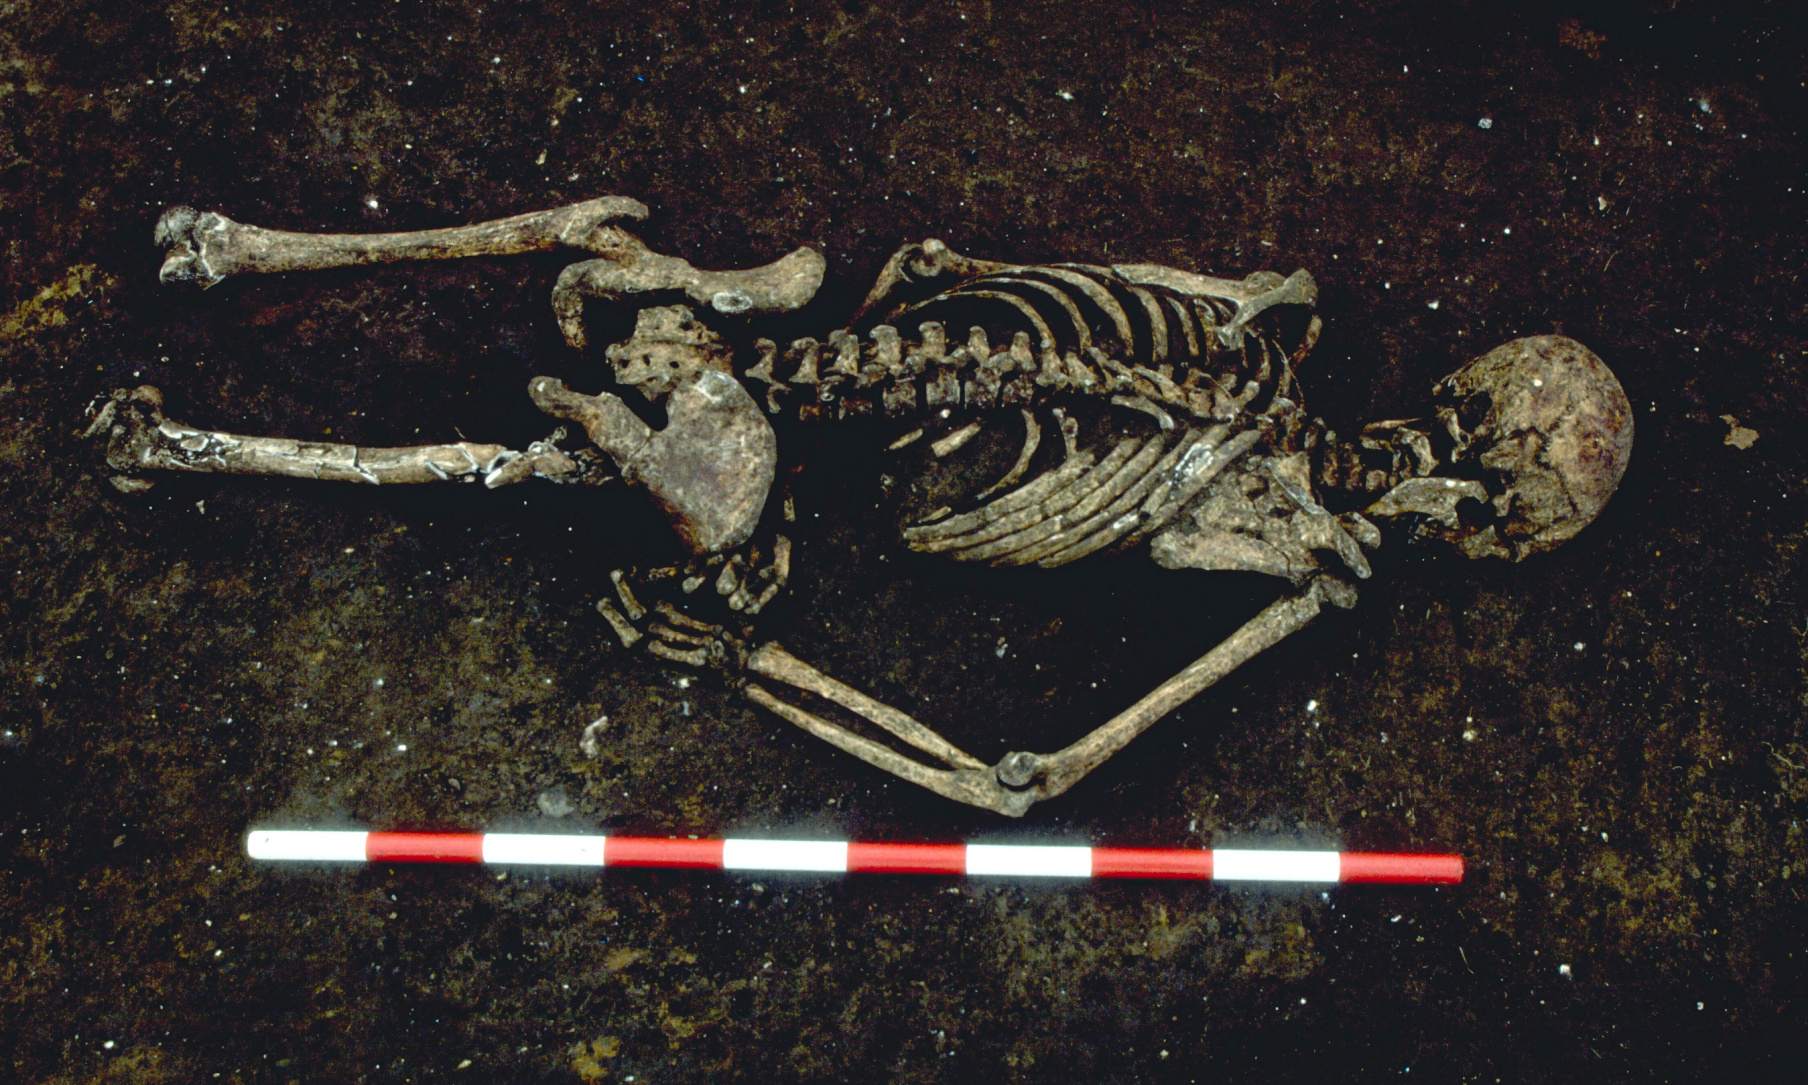 The 1,500-year-old skeleton was found face down with the right arm bent at an unusual angle. Study researchers say that he may have been tied up when he died. His lower body was destroyed by modern-day development.